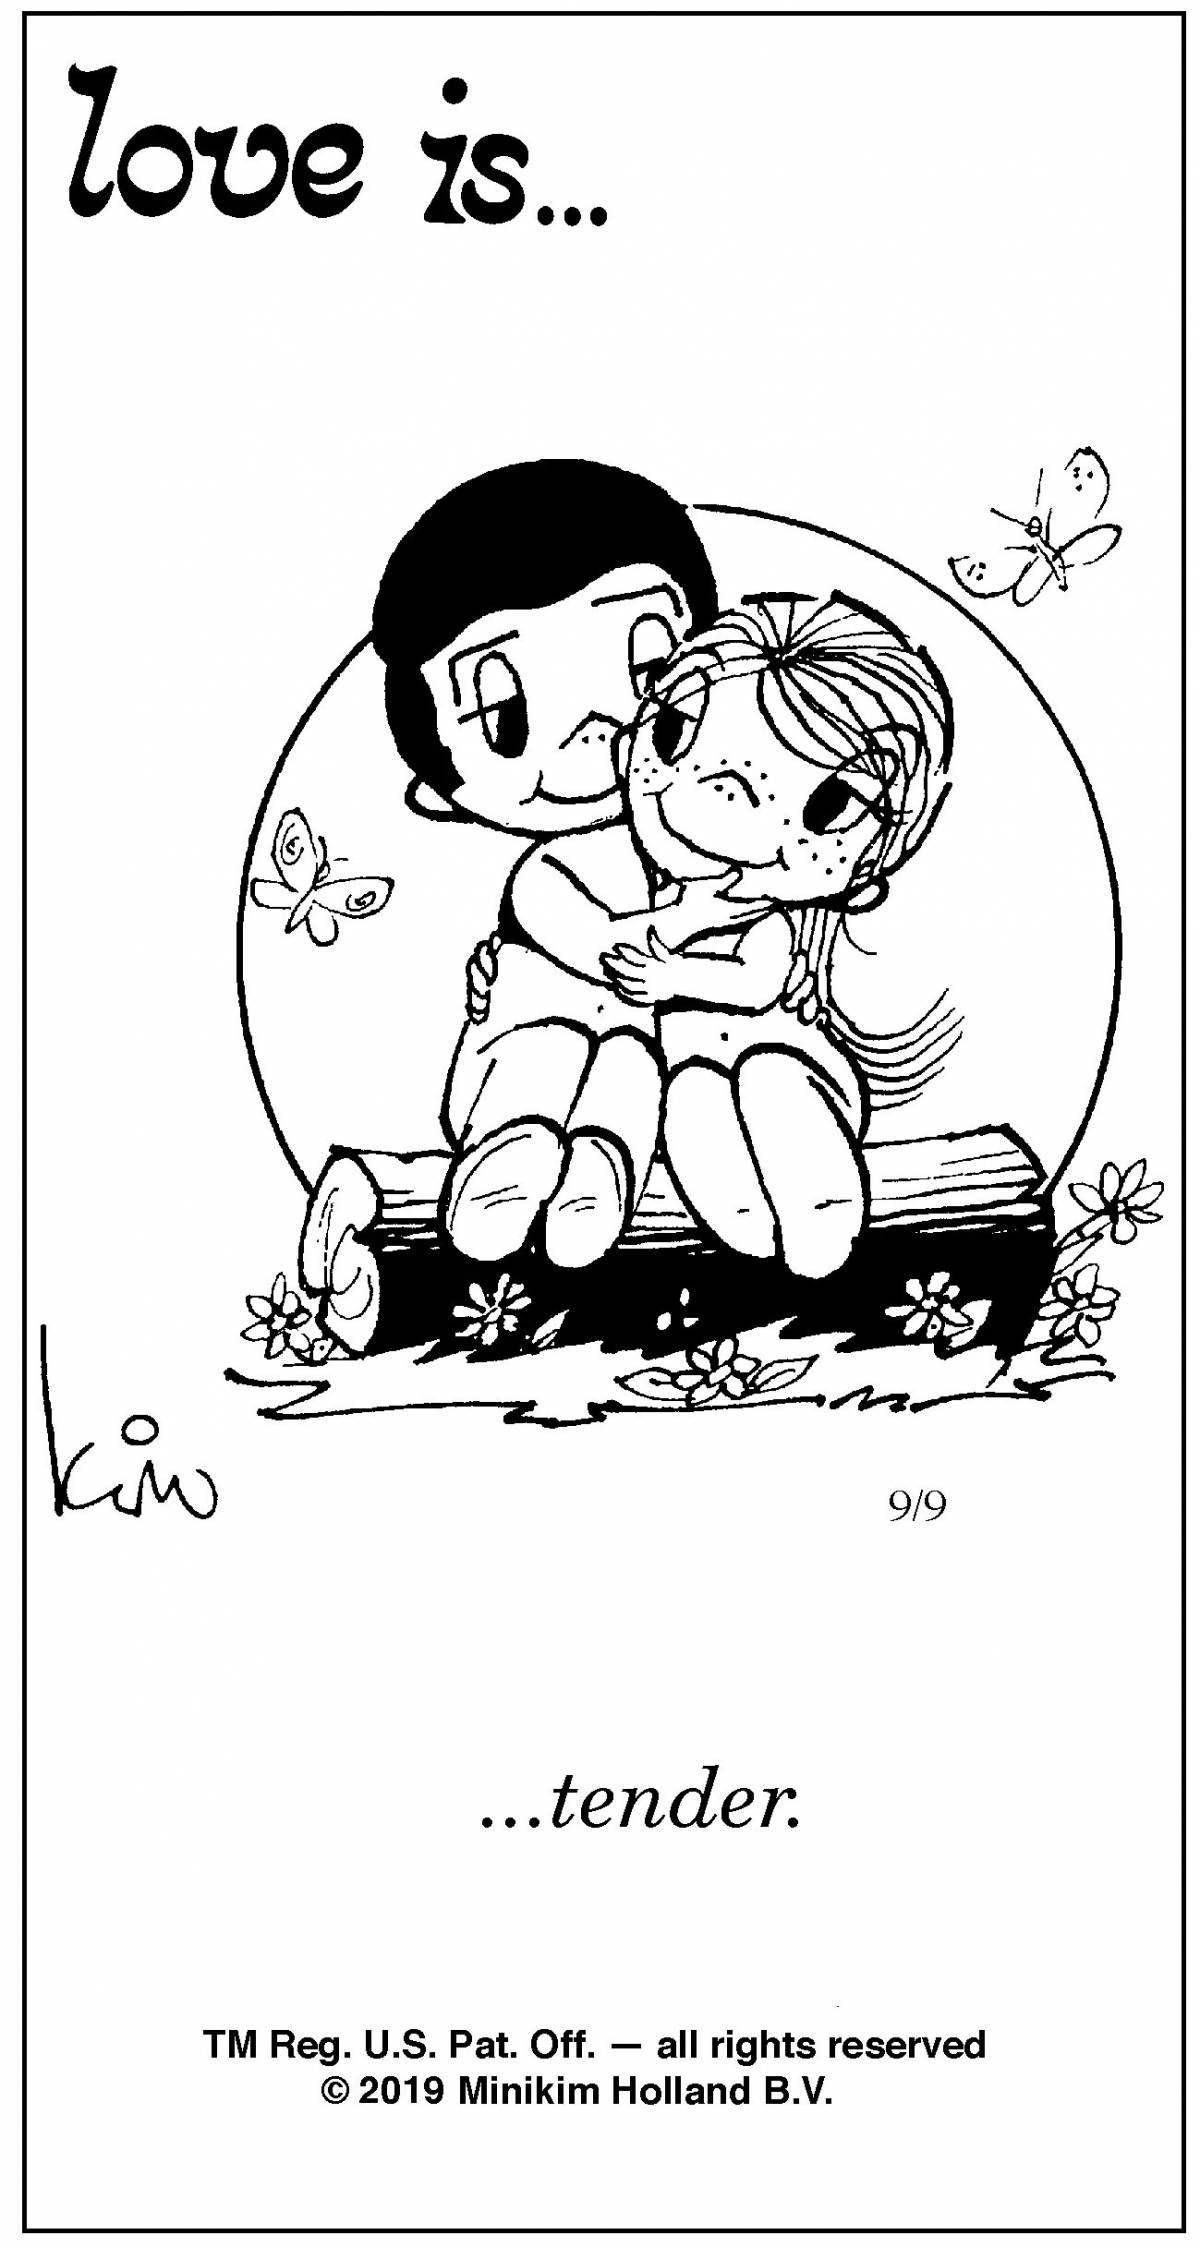 Charming love is coloring book